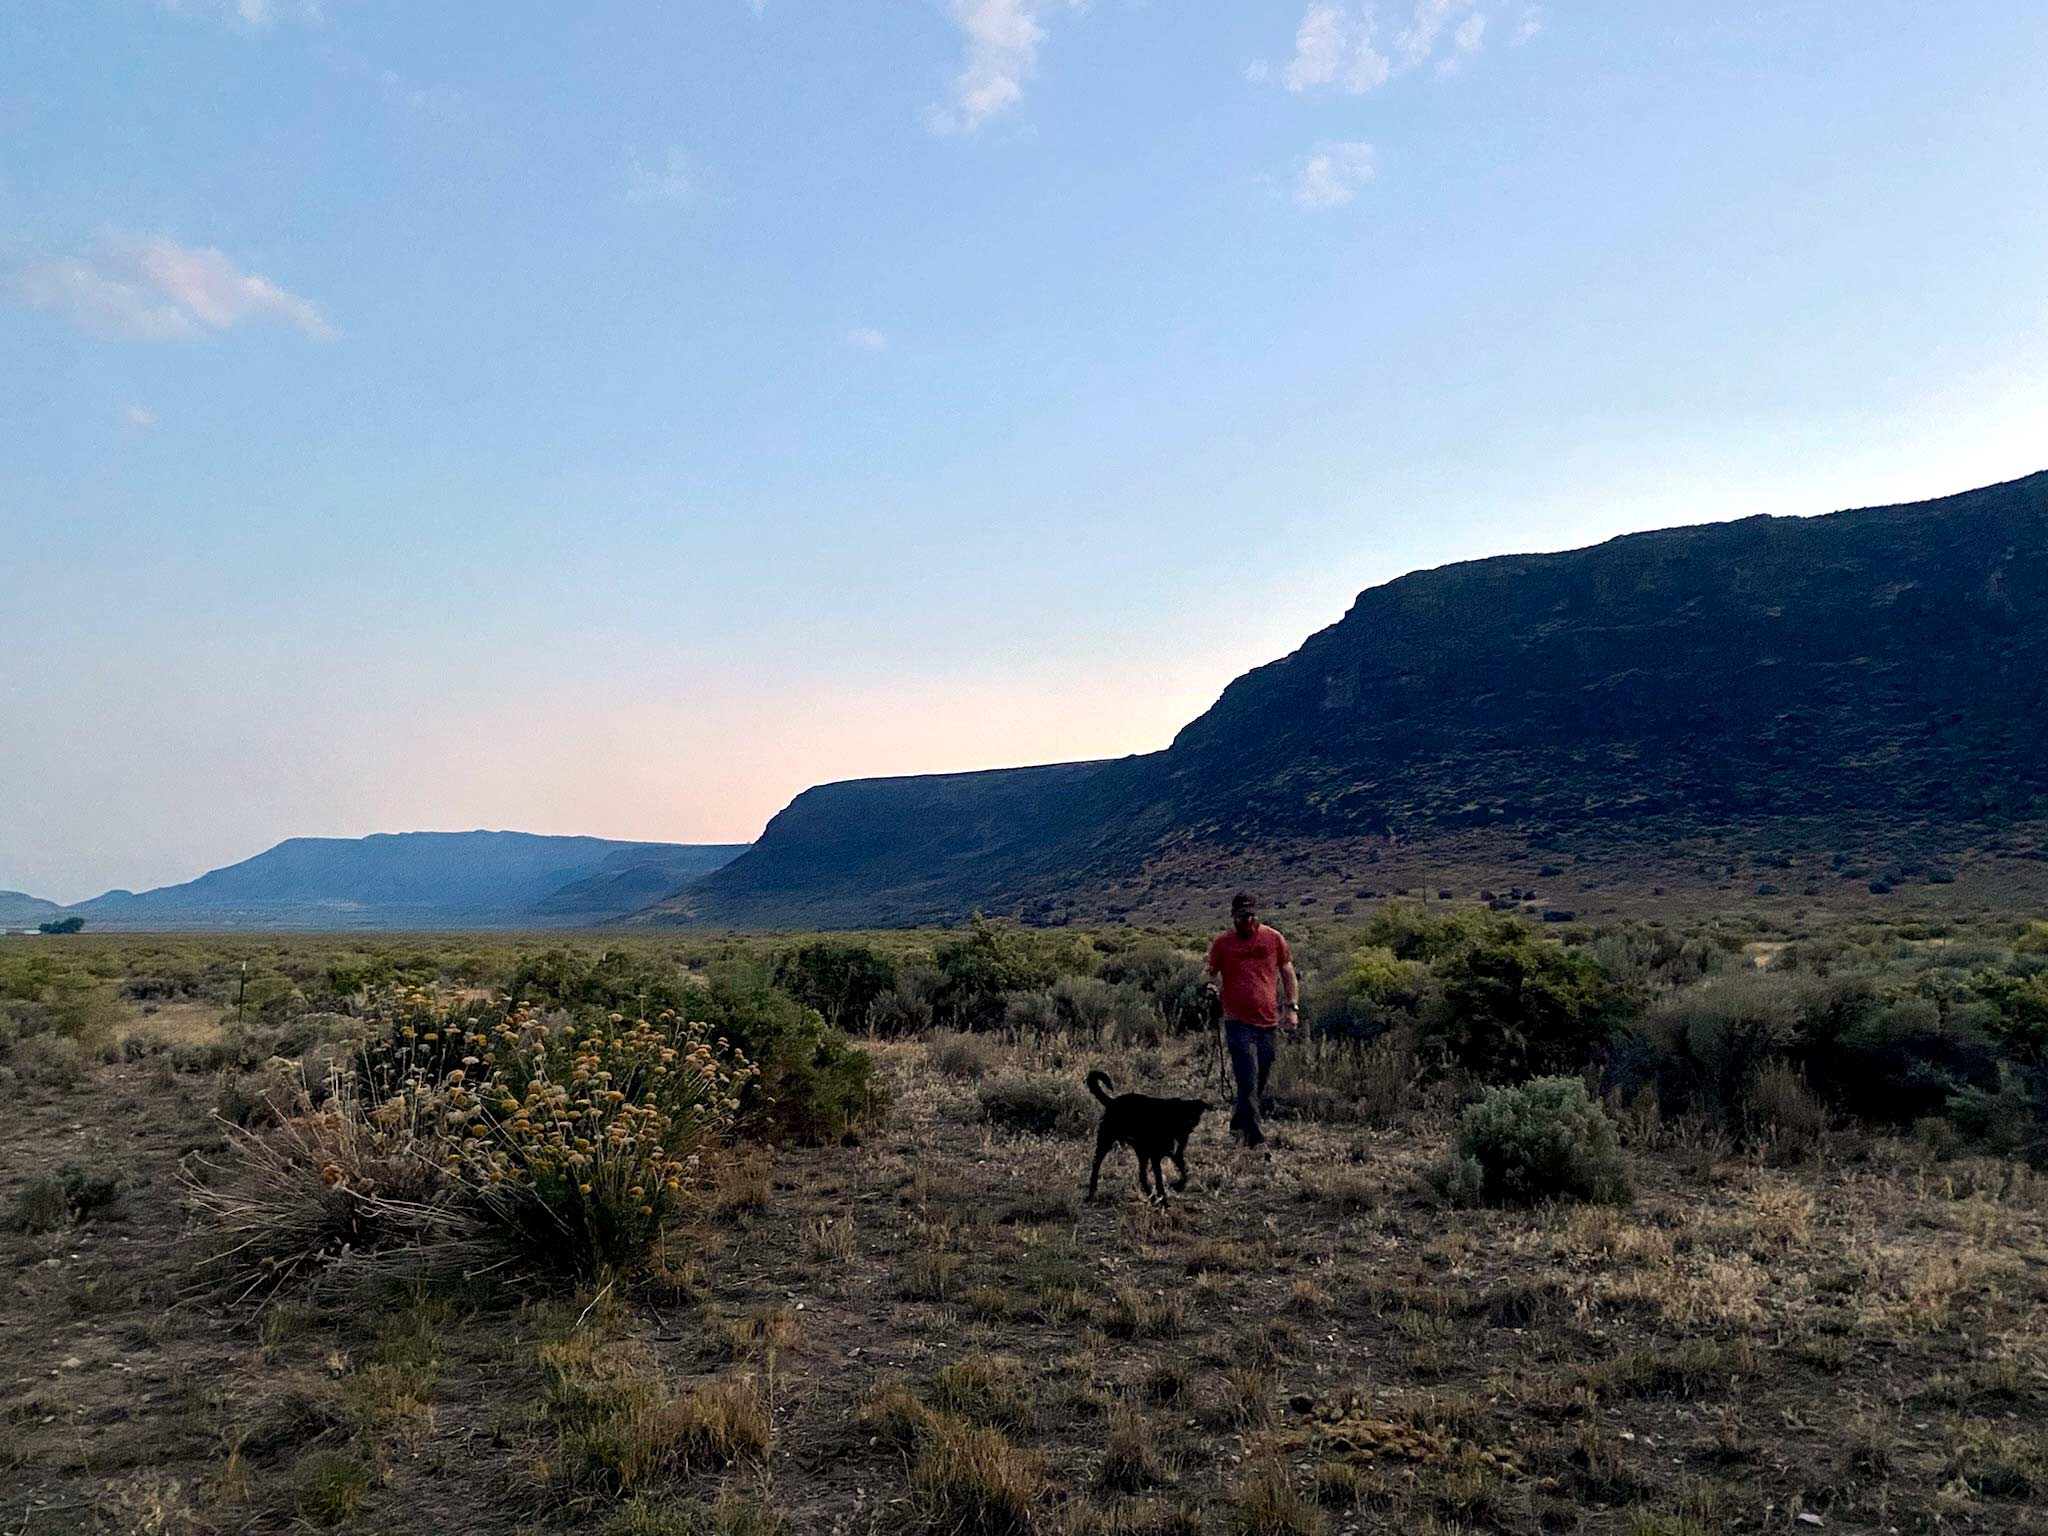 Late evening, blue sky, with hills in the background, and a man in an orange shirt walking a black dog through sagebrush and desert plants